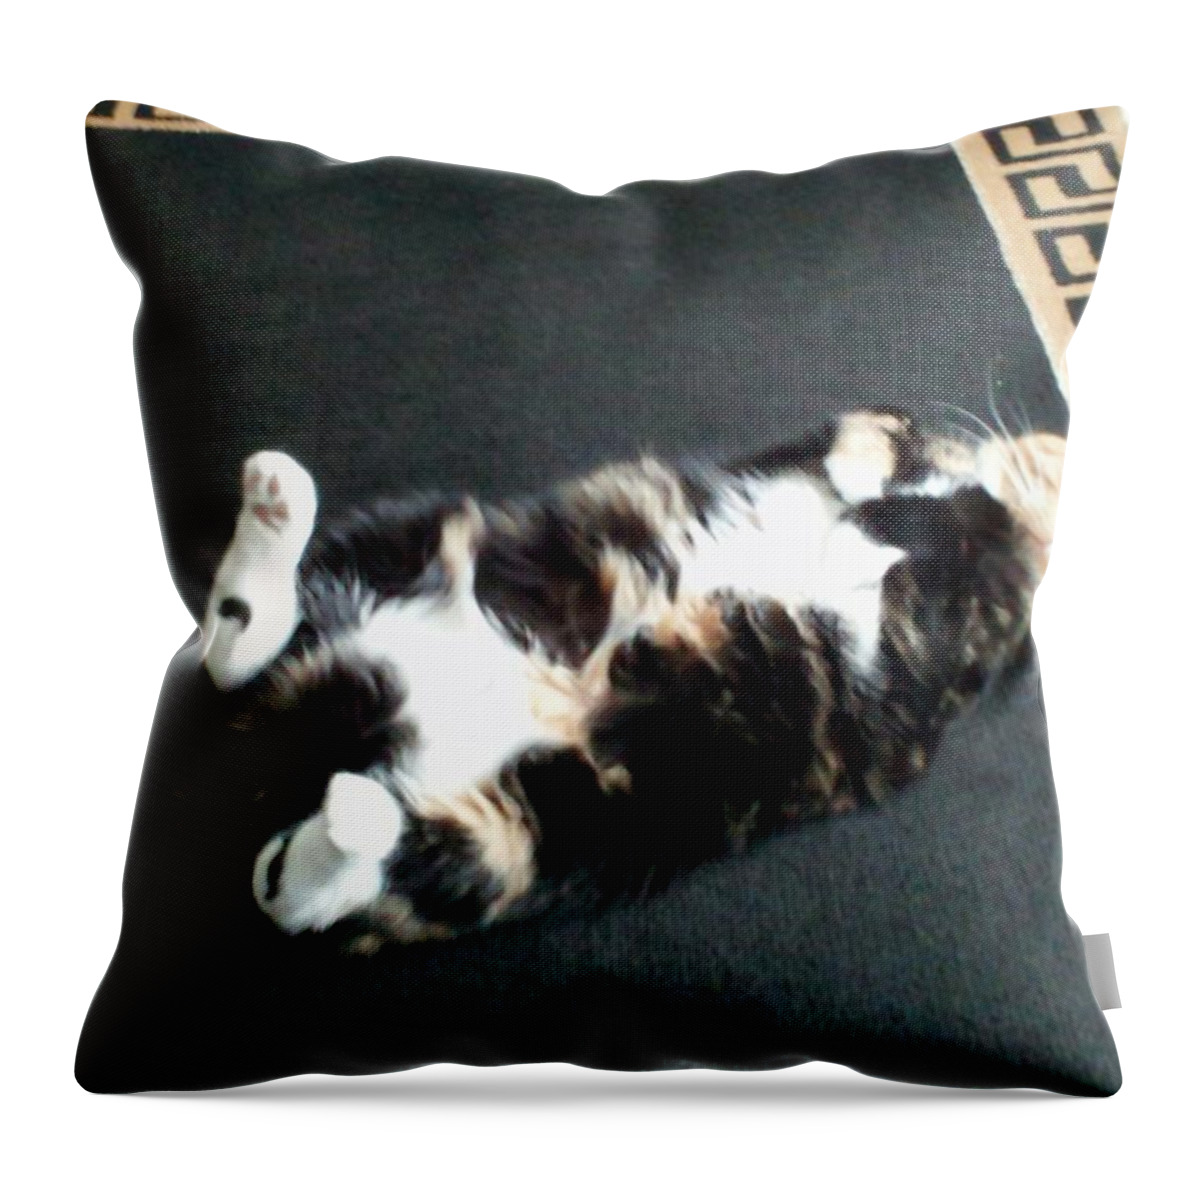 Cat Photo Throw Pillow featuring the photograph Nap Time by Gerry Smith